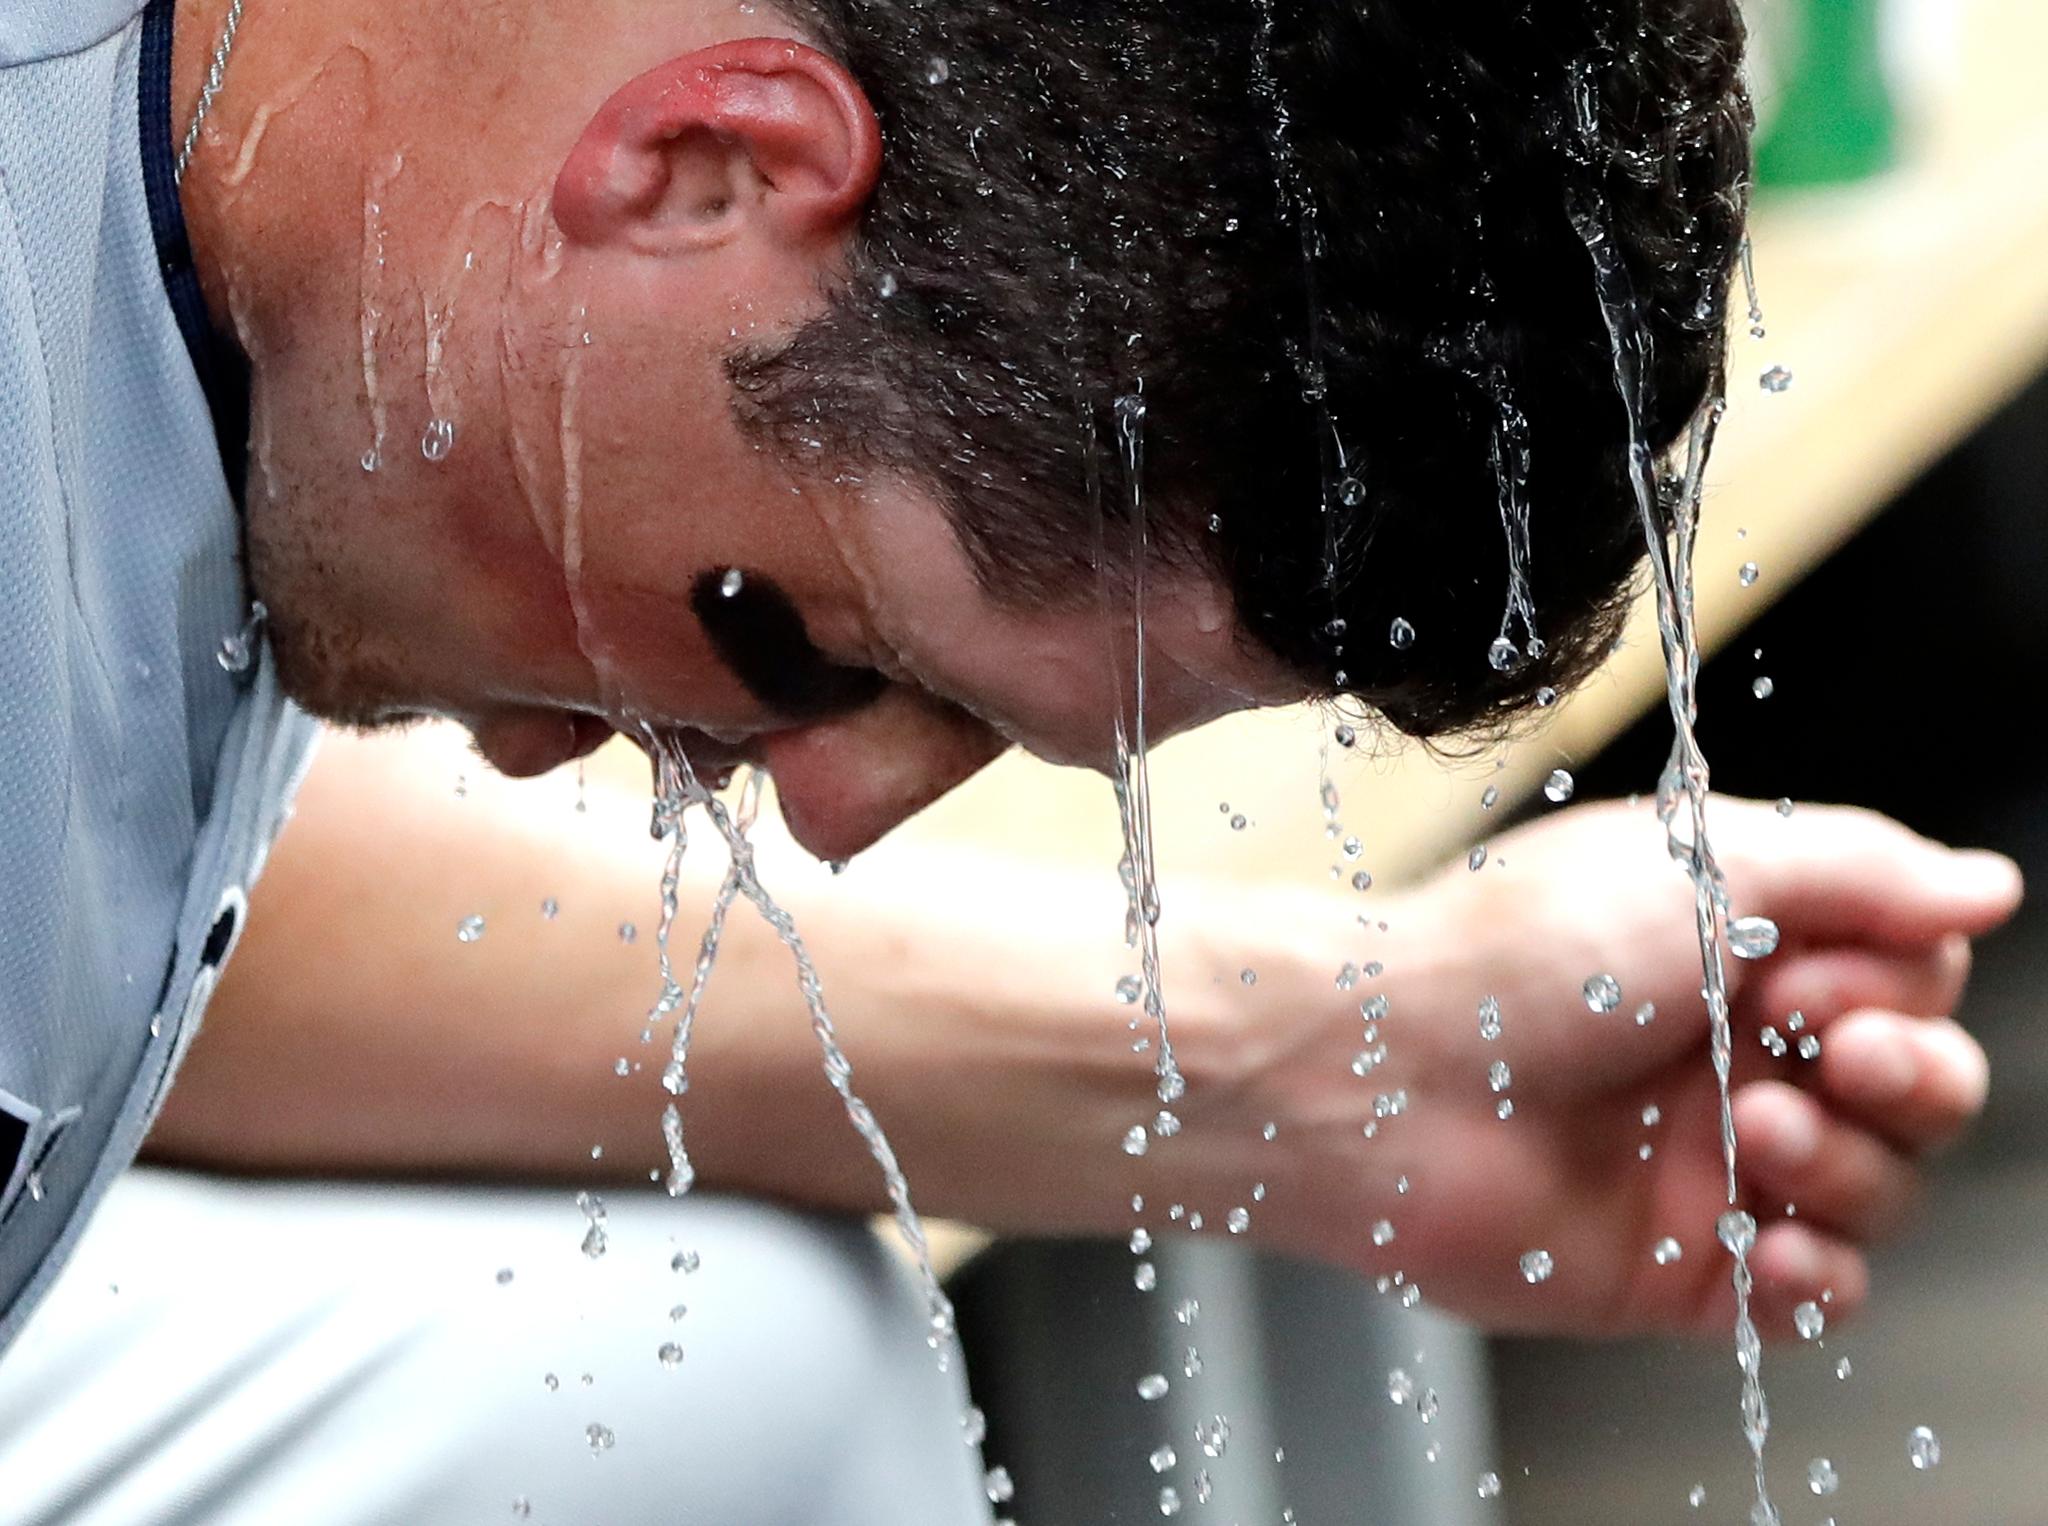 San Diego Padres' Hunter Renfroe cools off in the dugout